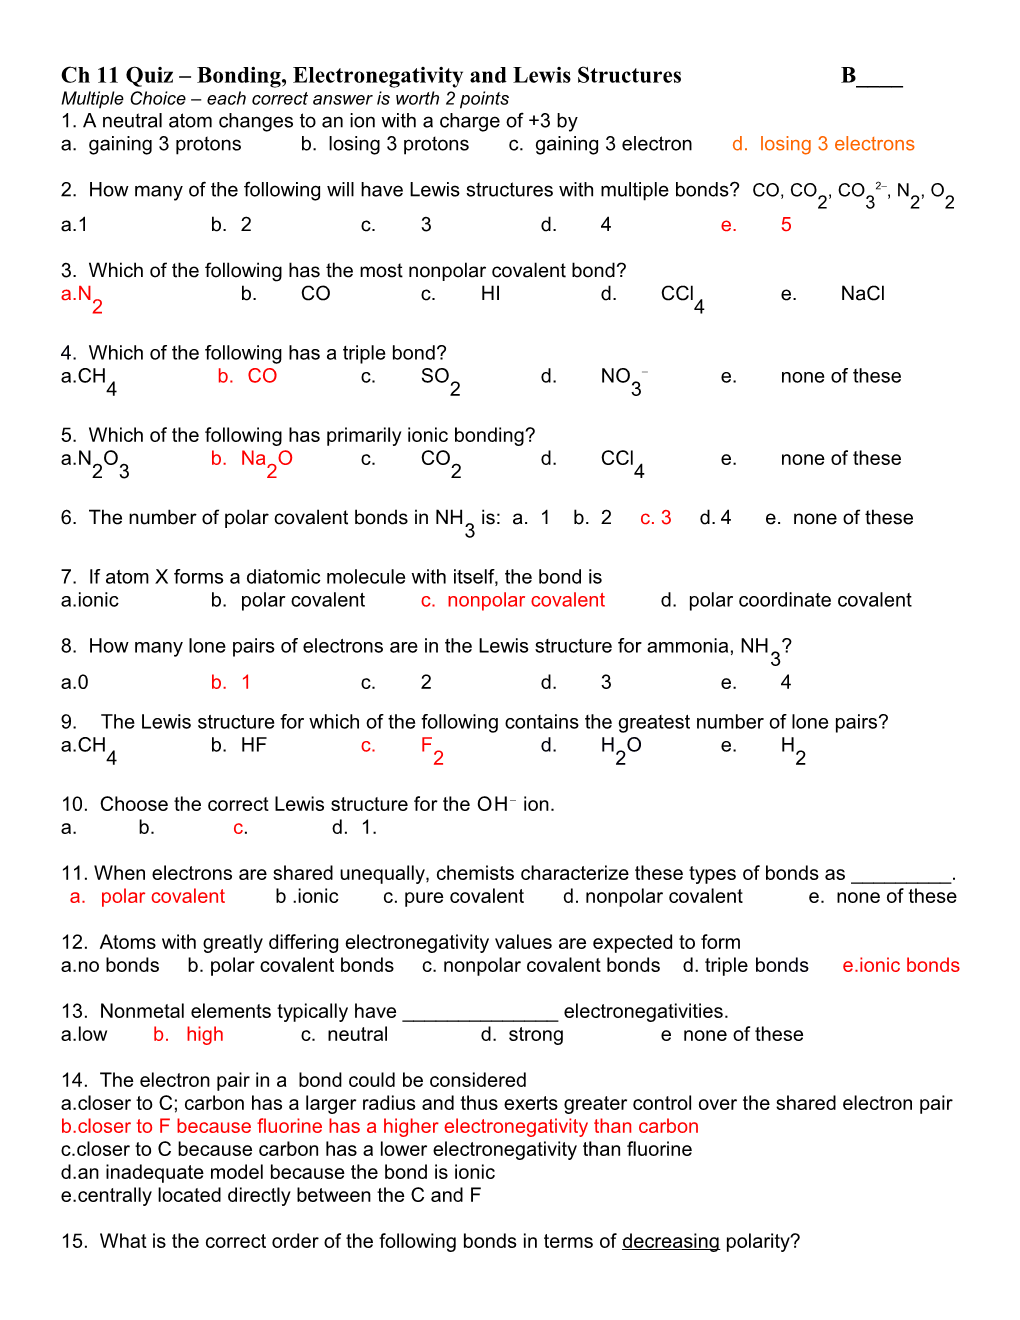 Ch 11 Quiz Bonding, Electronegativity and Lewis Structures